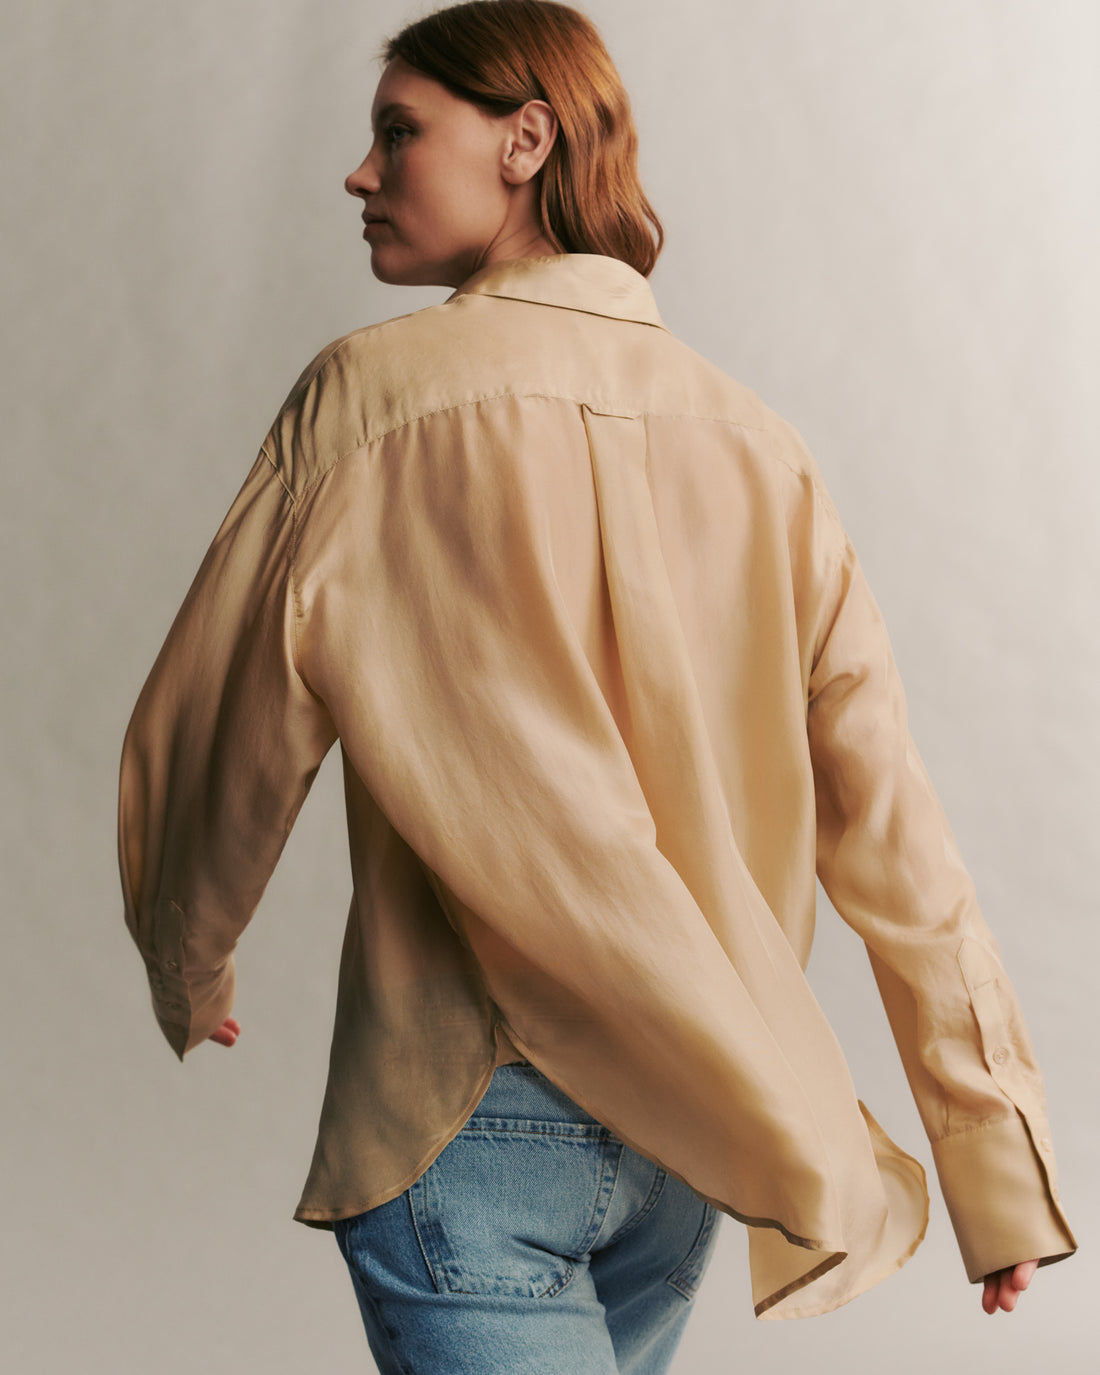 The TWP Big Joe Shirt in Tan available at The New Trend Australia